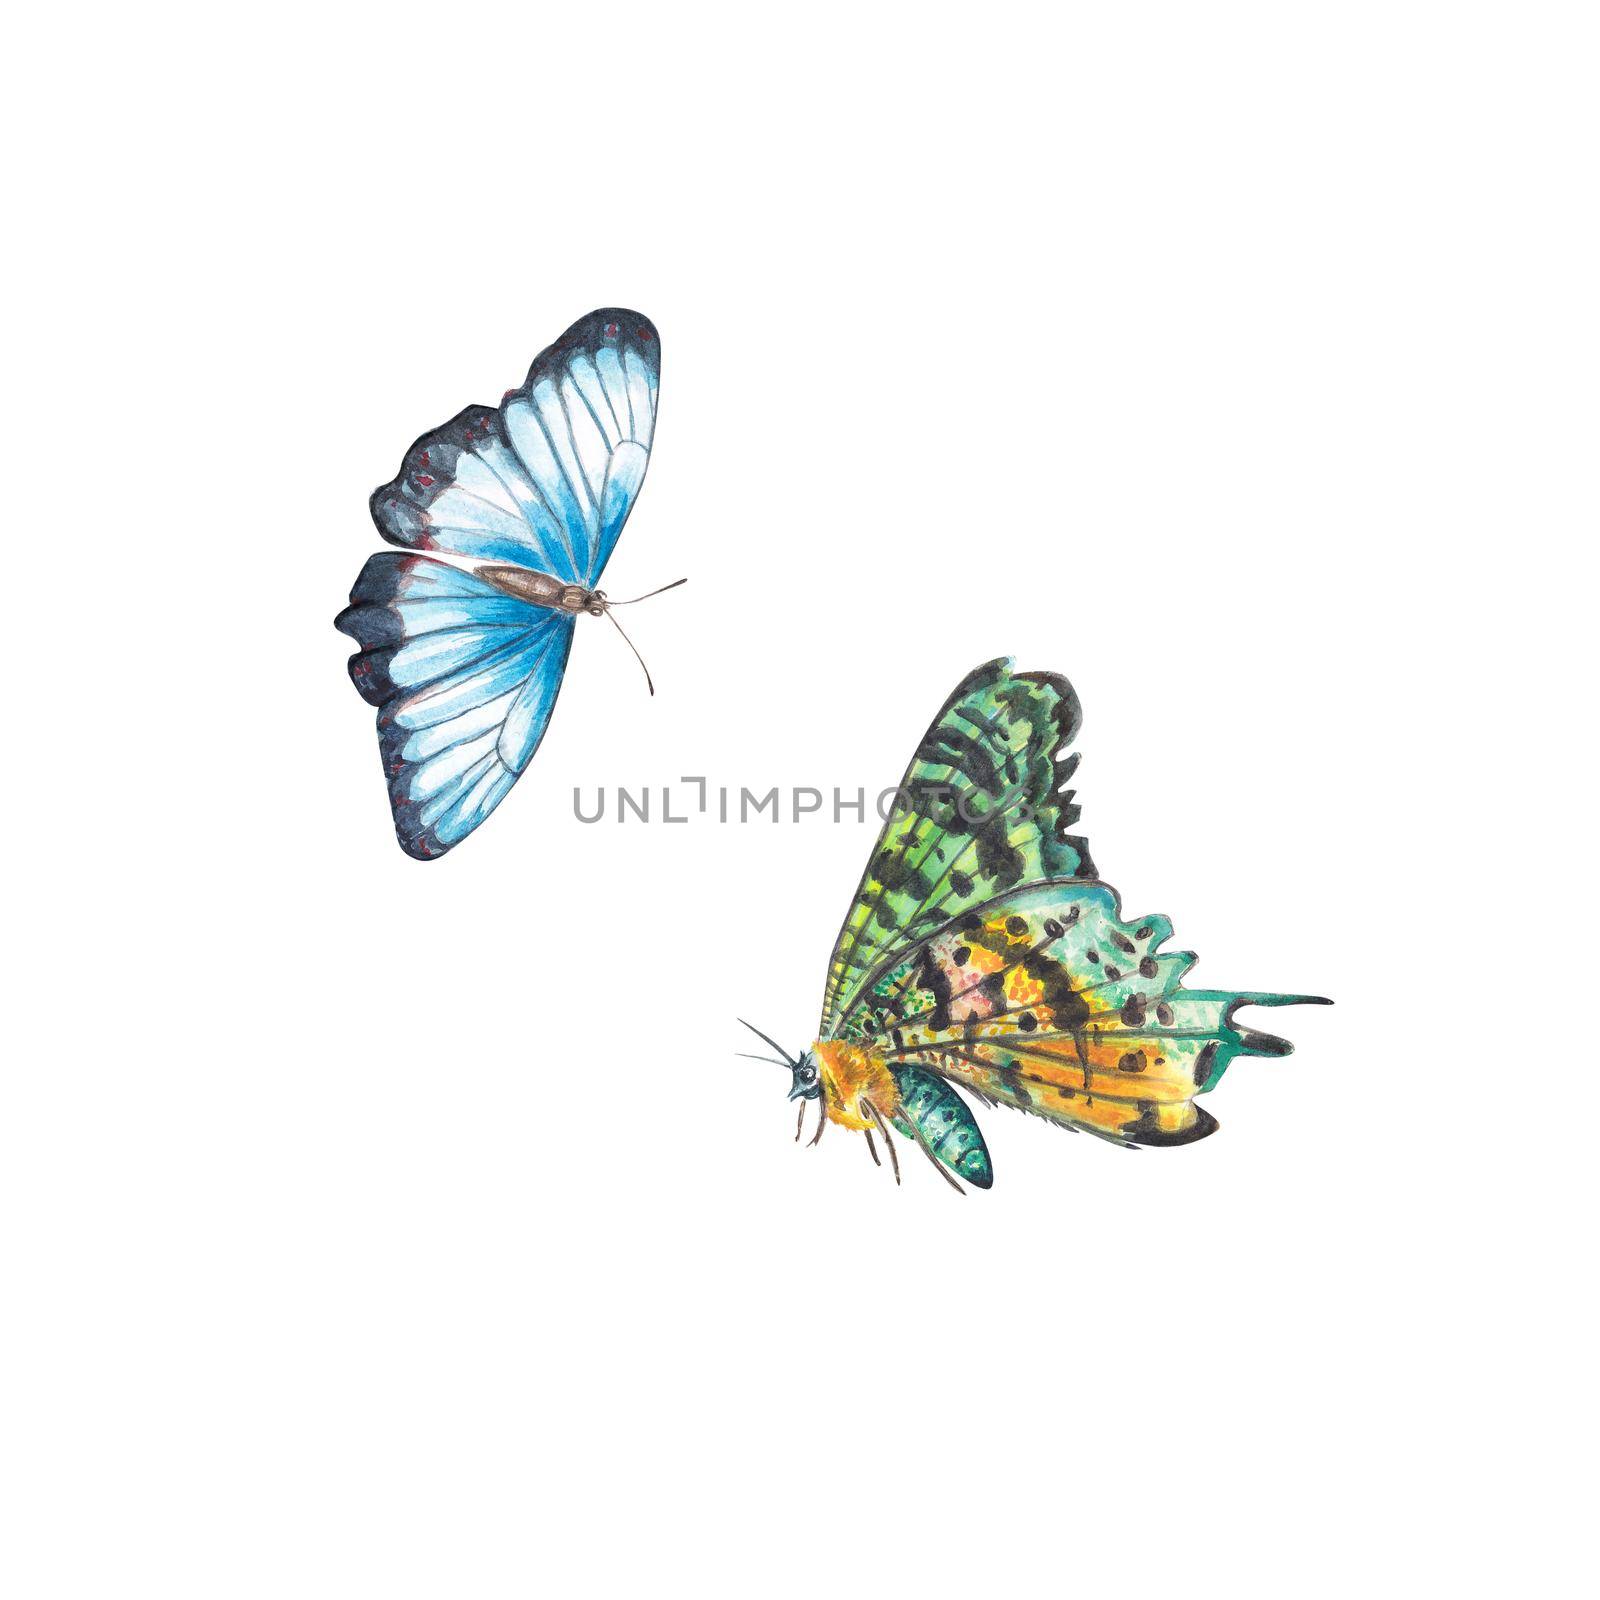 Two exotic bright butterflies highlighted on a white background. Small blue and multicolored. Watercolor illustration for the design of postcards, wedding invitations, wallpapers, business cards.